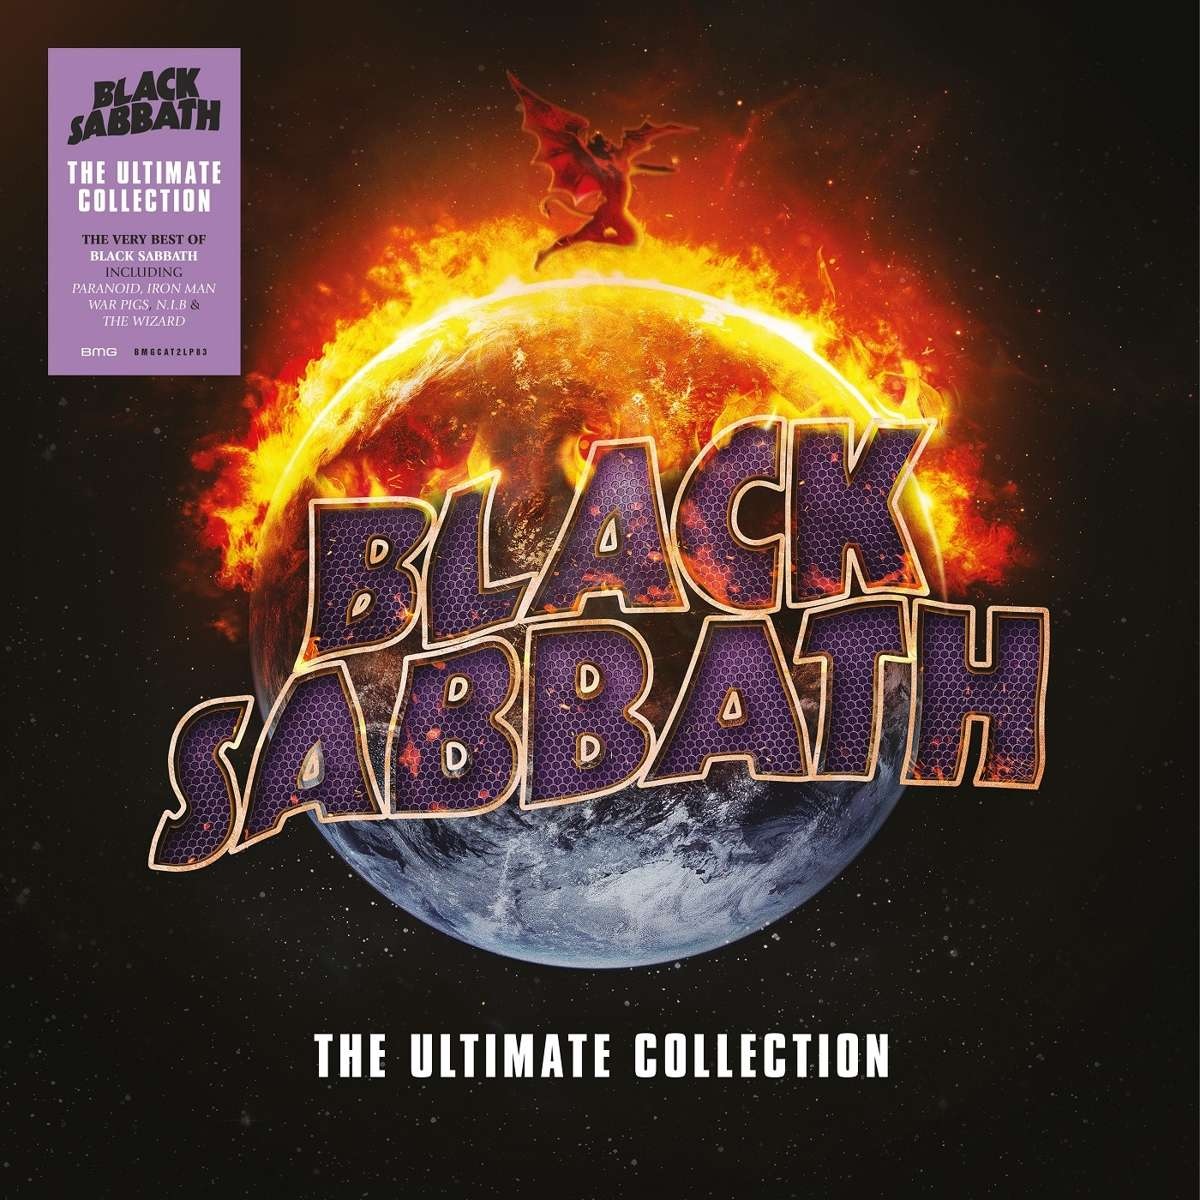 Металл BMG Rights Black Sabbath - The Ultimate Collection (Black Vinyl 2LP) игра для пк thq nordic zoo tycoon ultimate animal collection